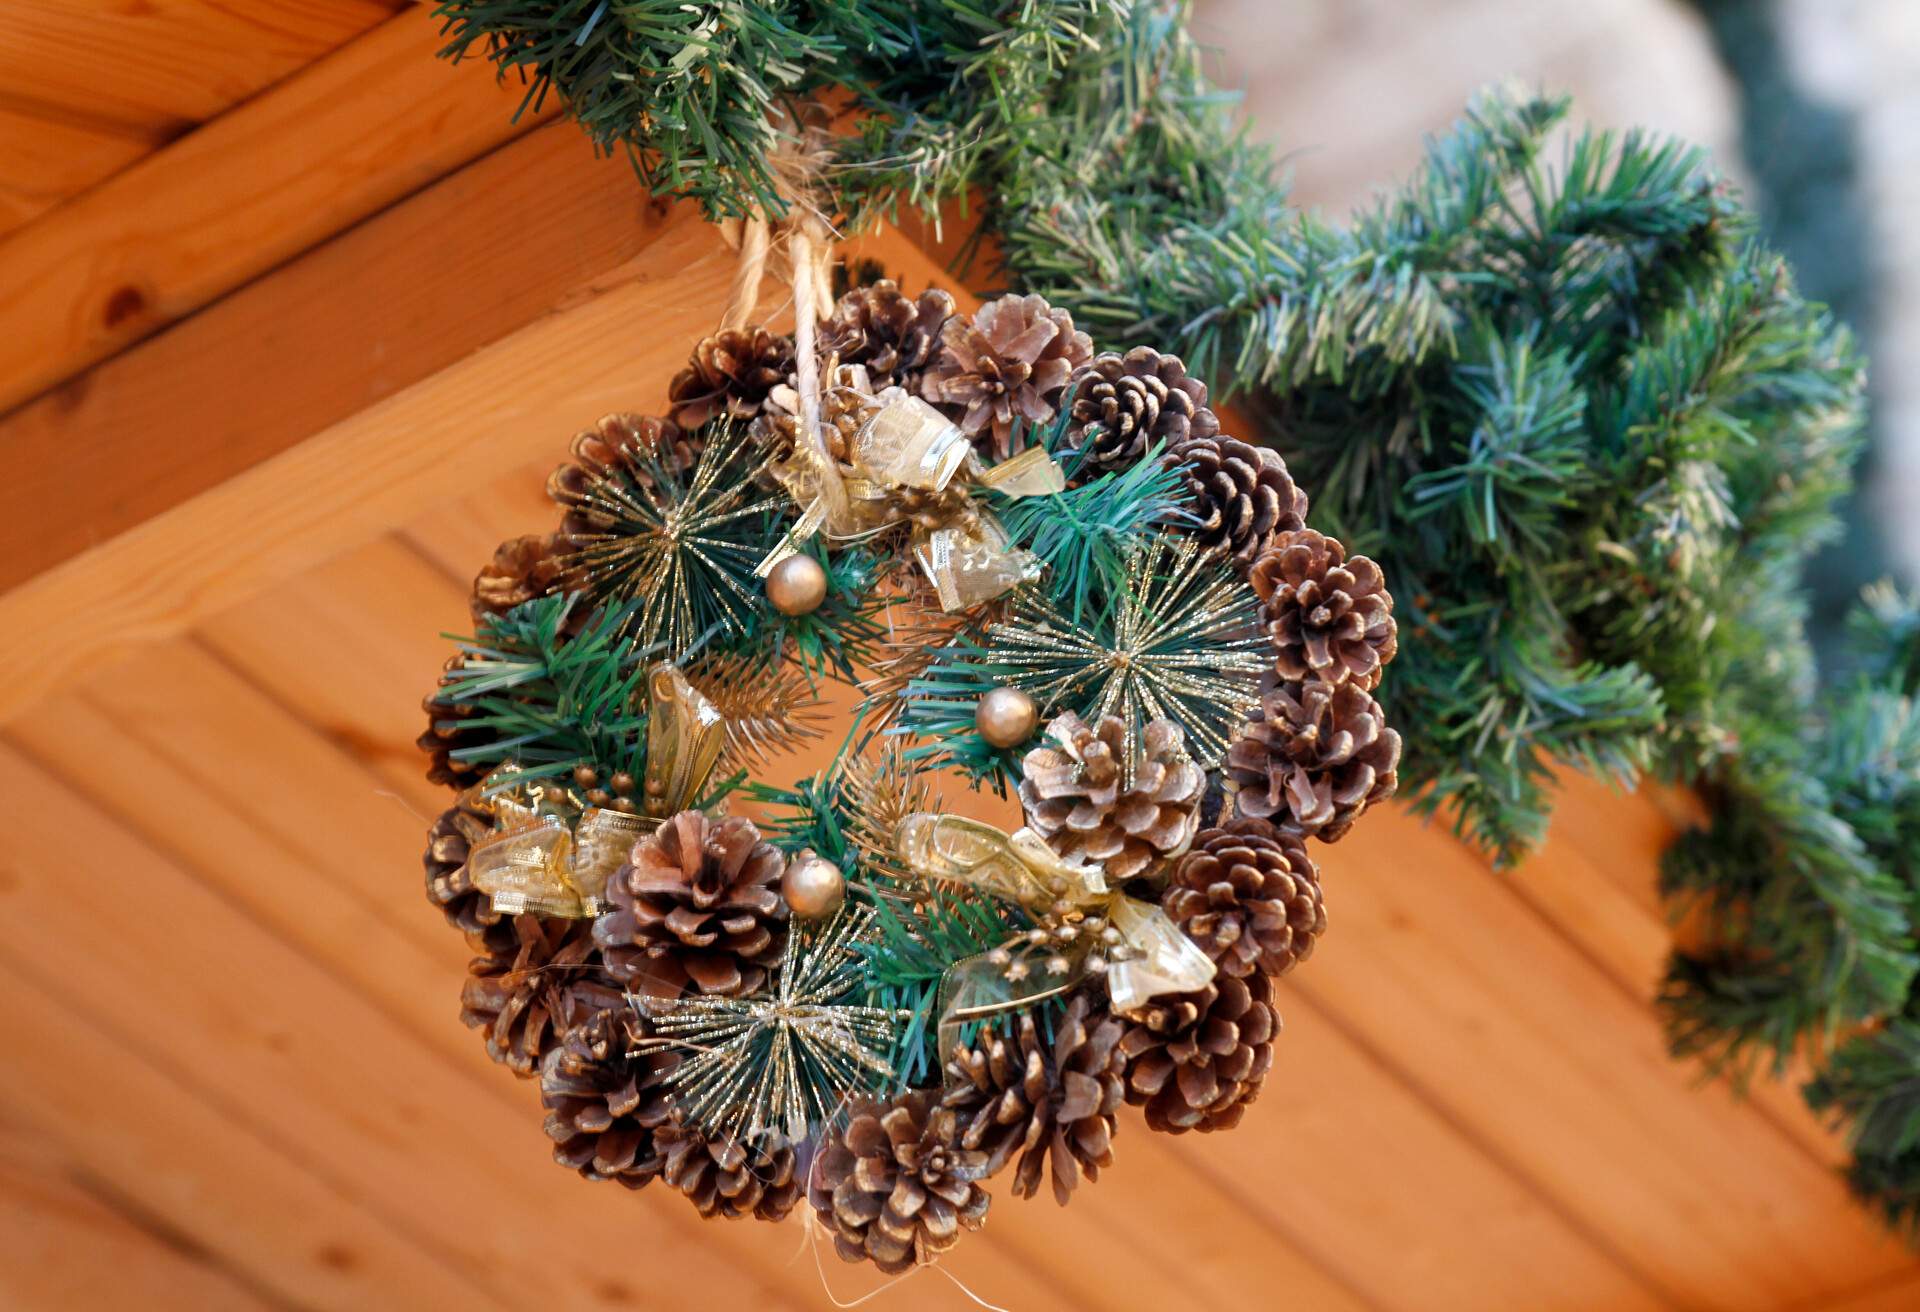 Christmas wreath hanging outdoors